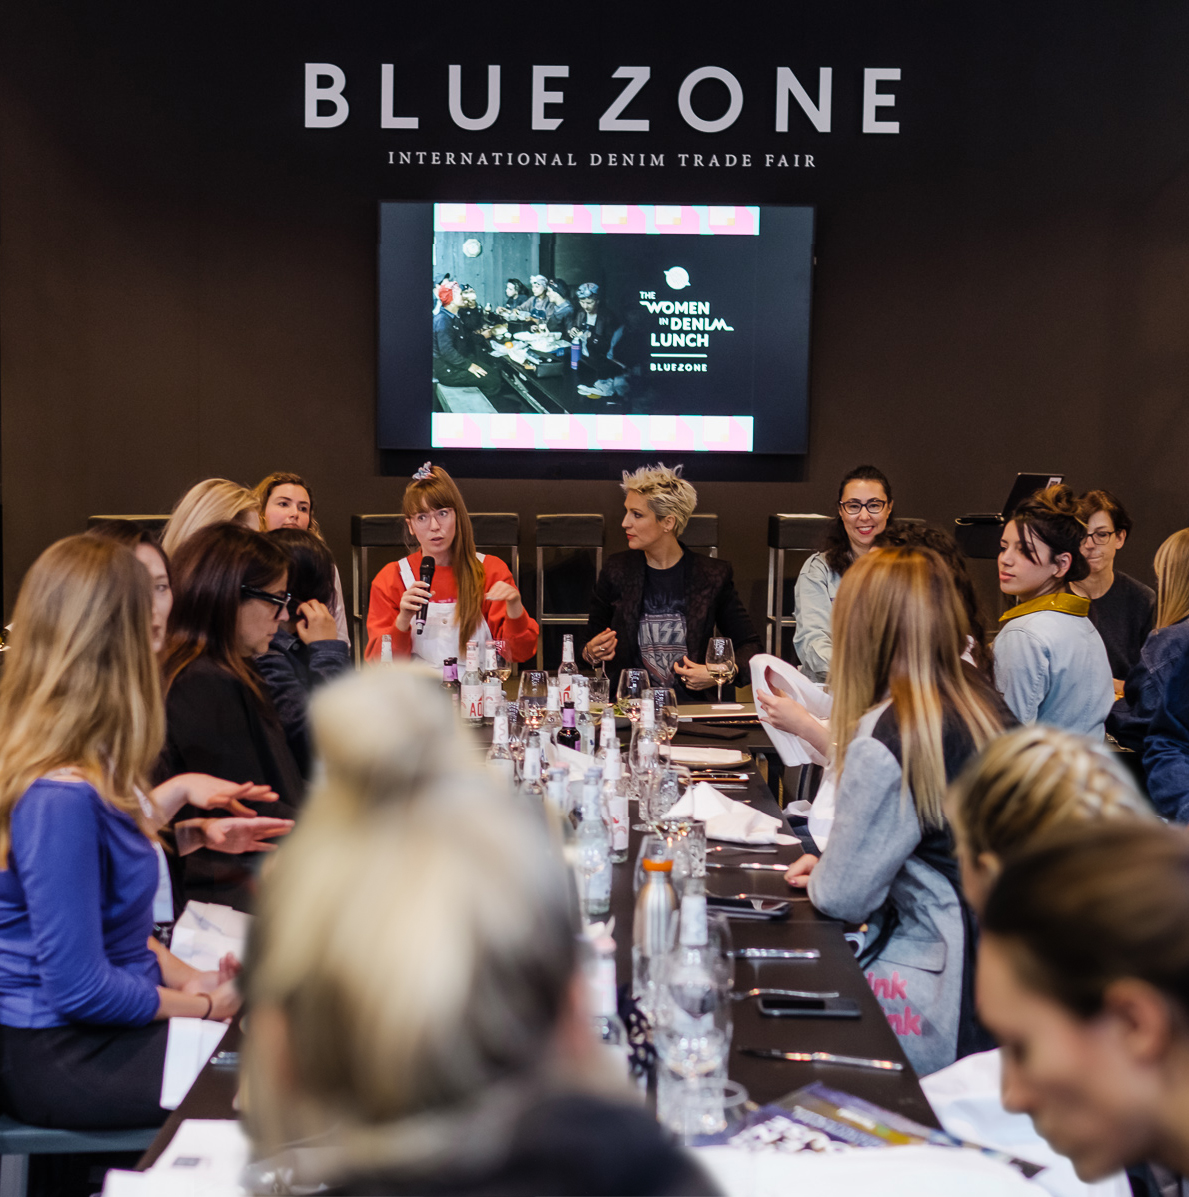 Bluezone supports the women in Denim